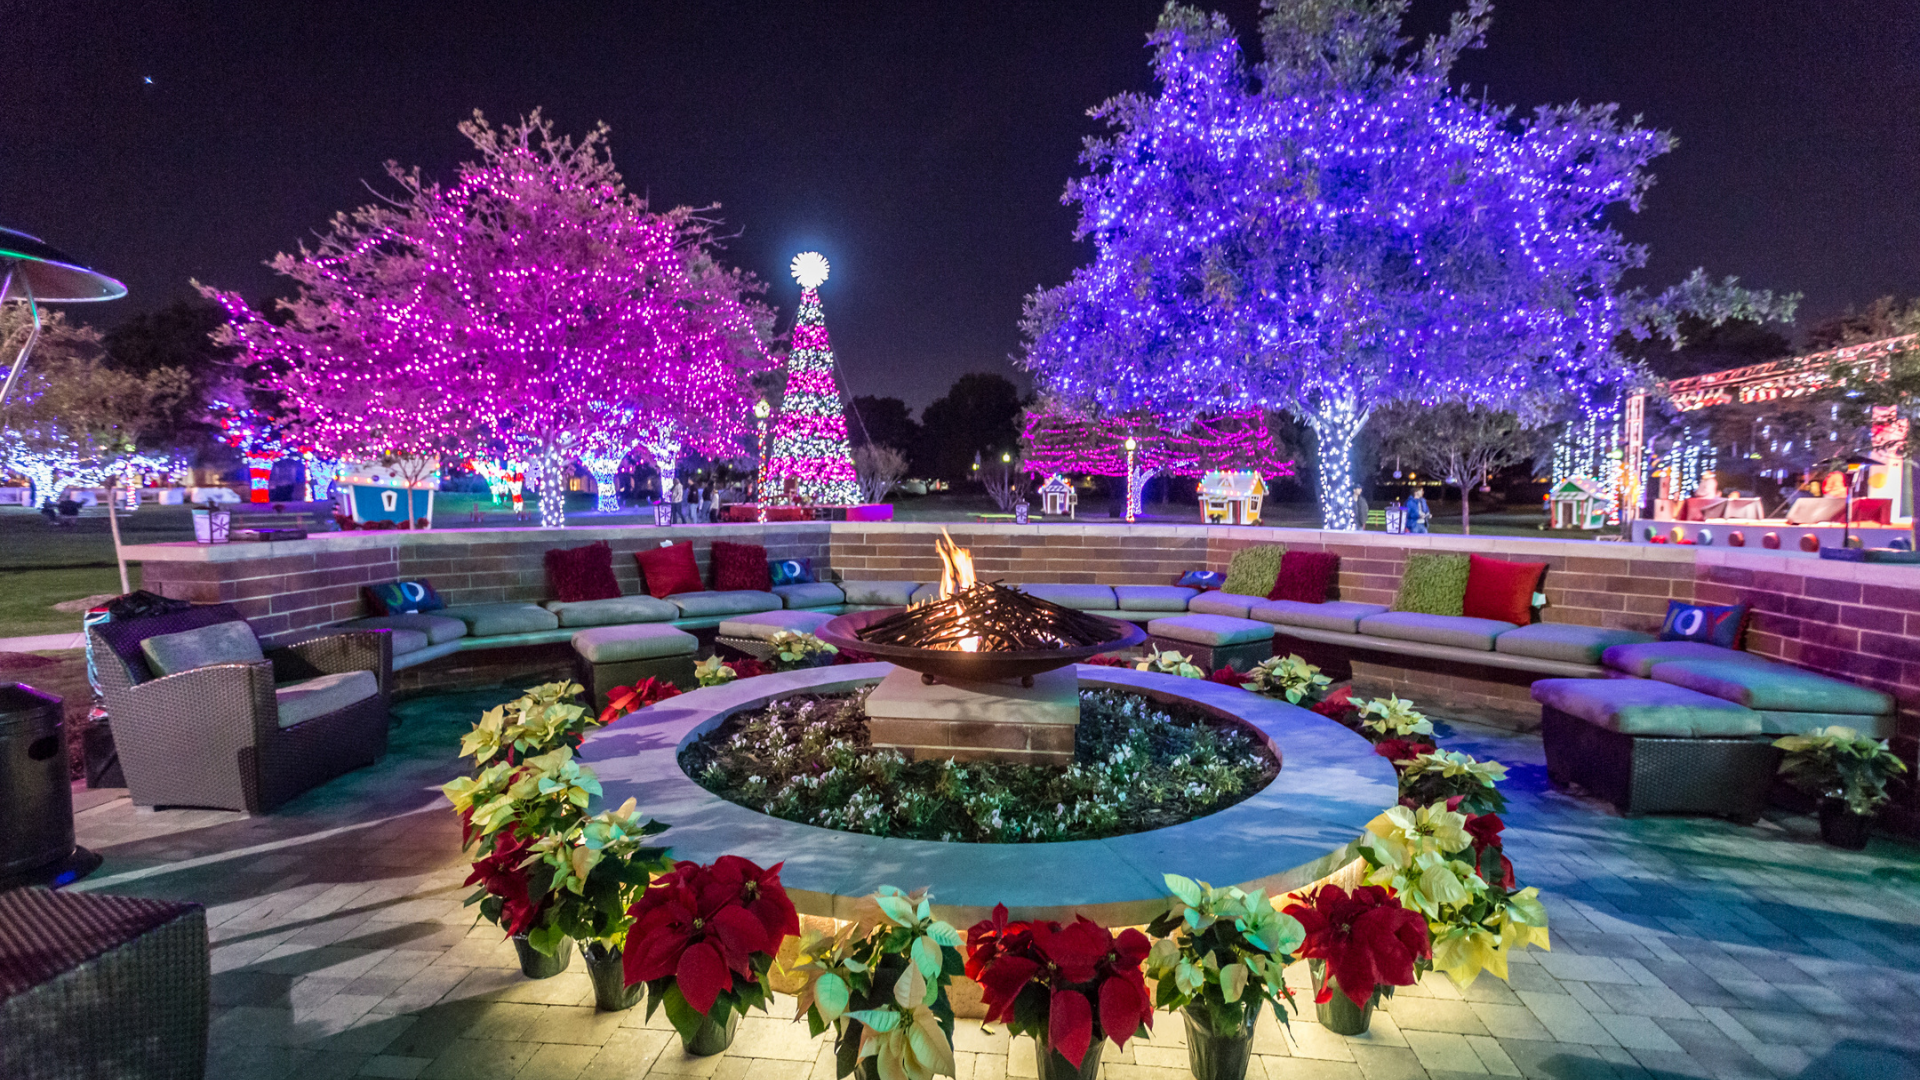 Outdoor seating area with trees decorated with lights in the background